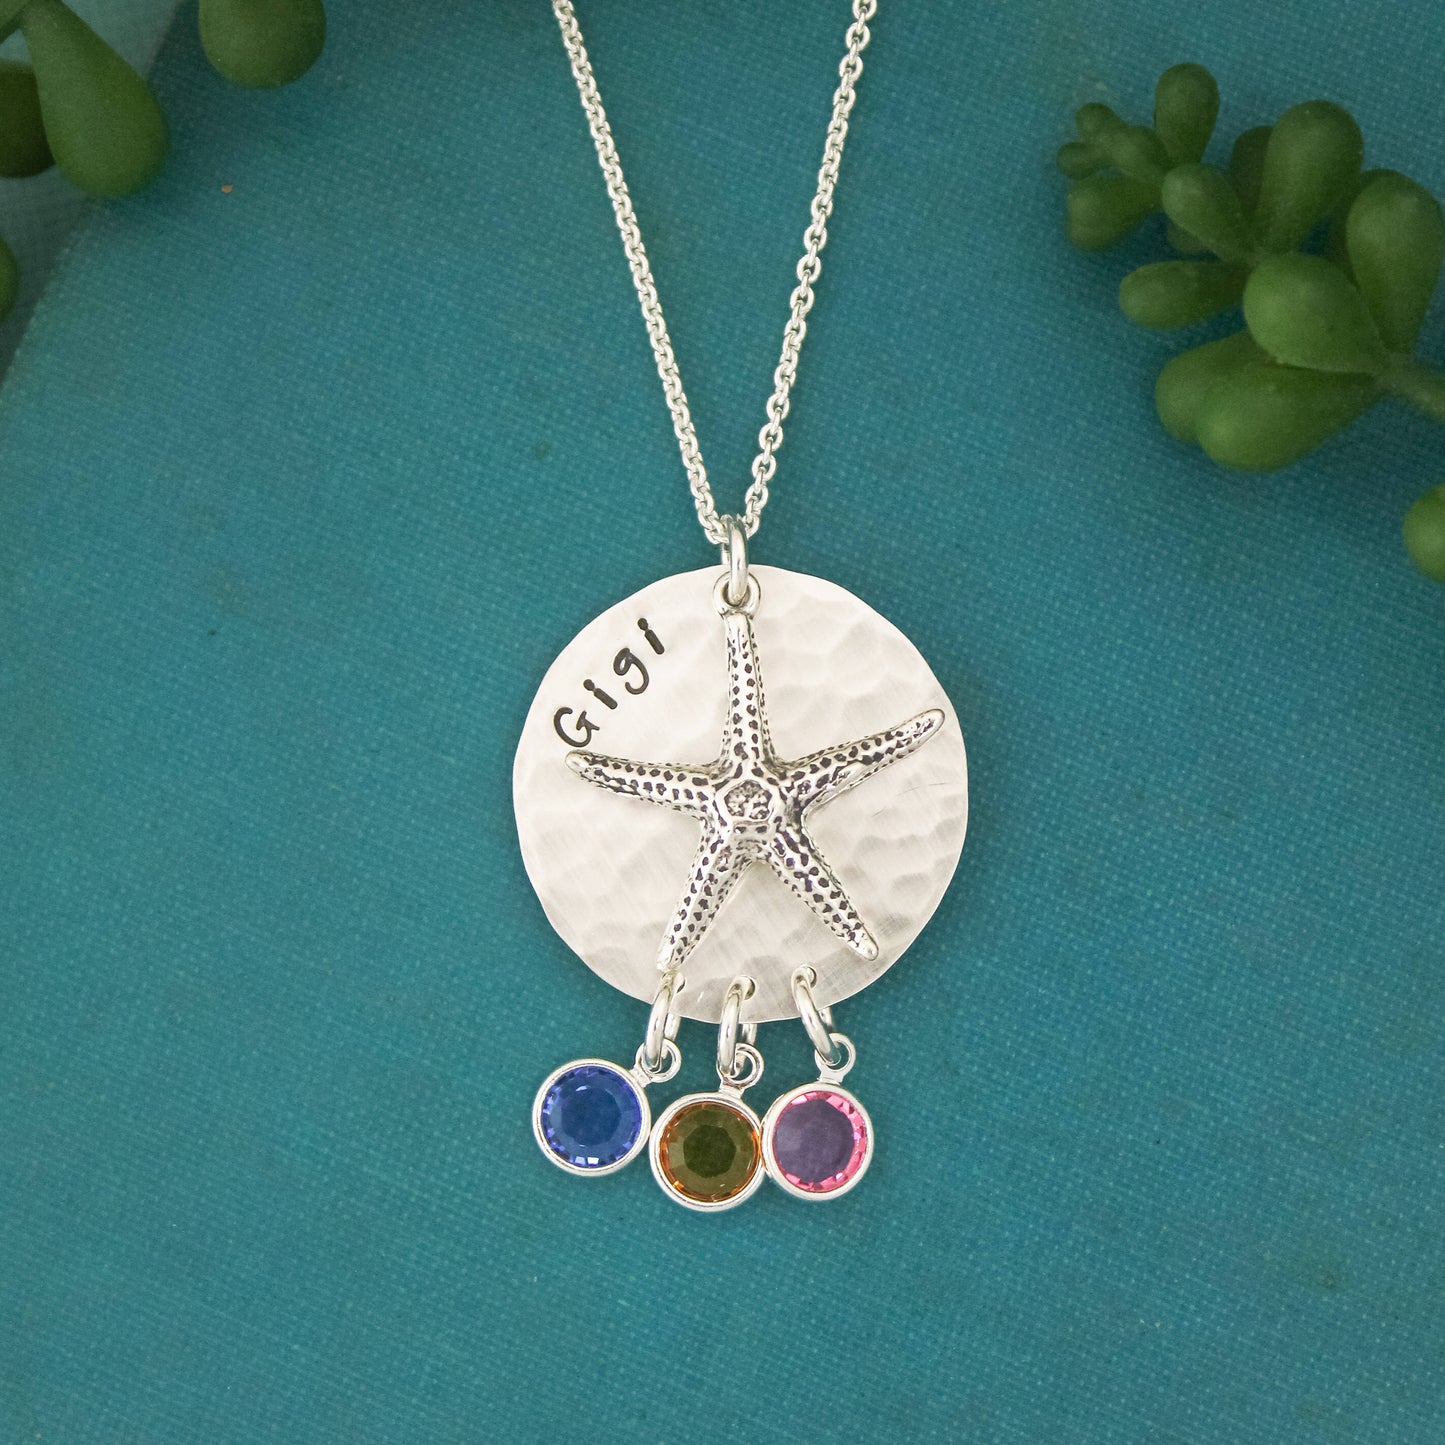 Personalized Starfish Grandma Mom Necklace with Birthstone, Beach Grandmother Necklace, Starfish Mother Necklace, Hand Stamped Jewelry